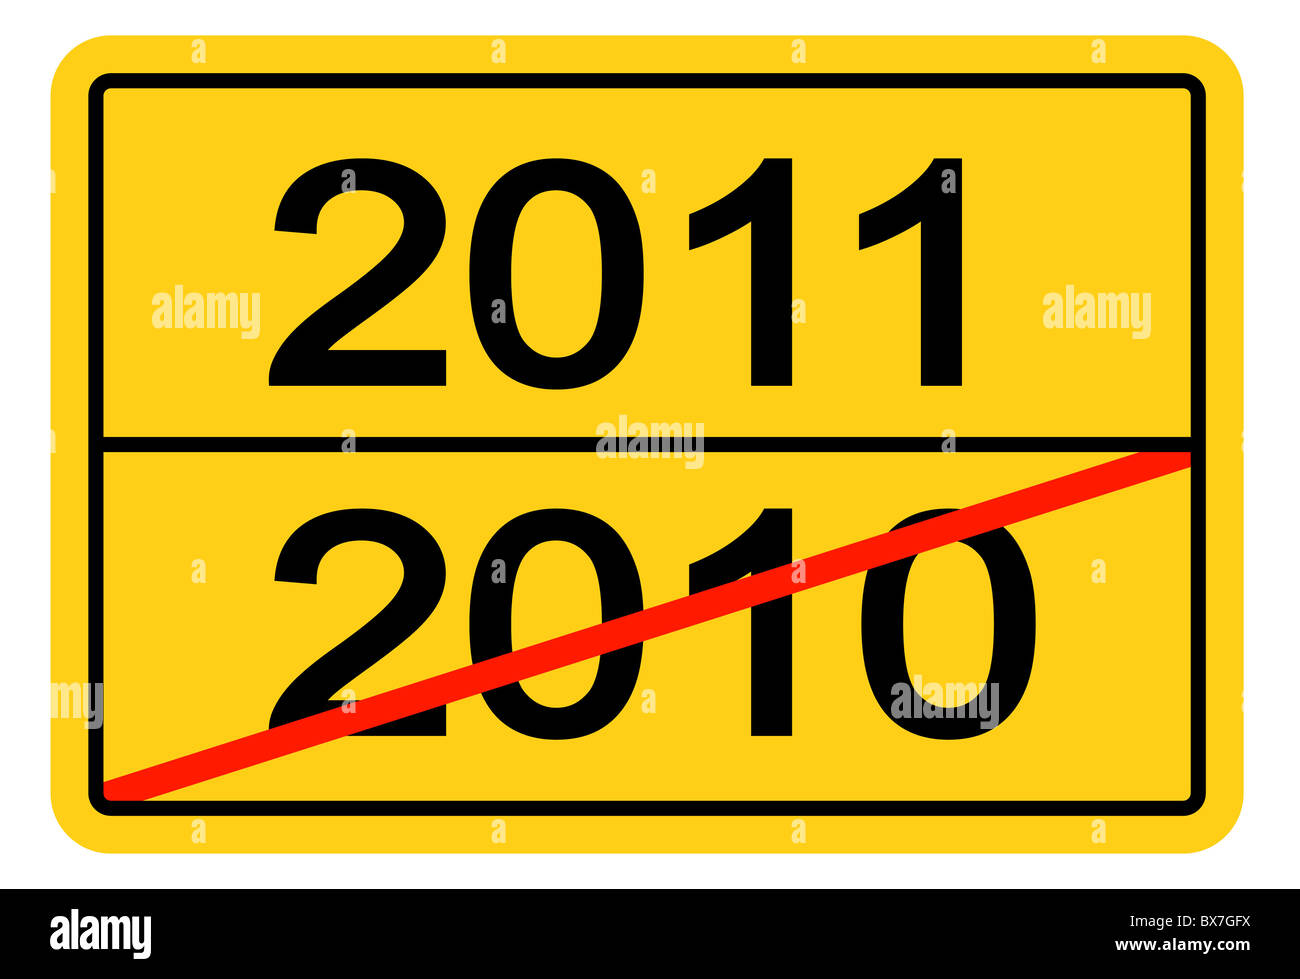 Stylized city limit sign with a canceled year 2010 and the upcoming year 2011. Stock Photo